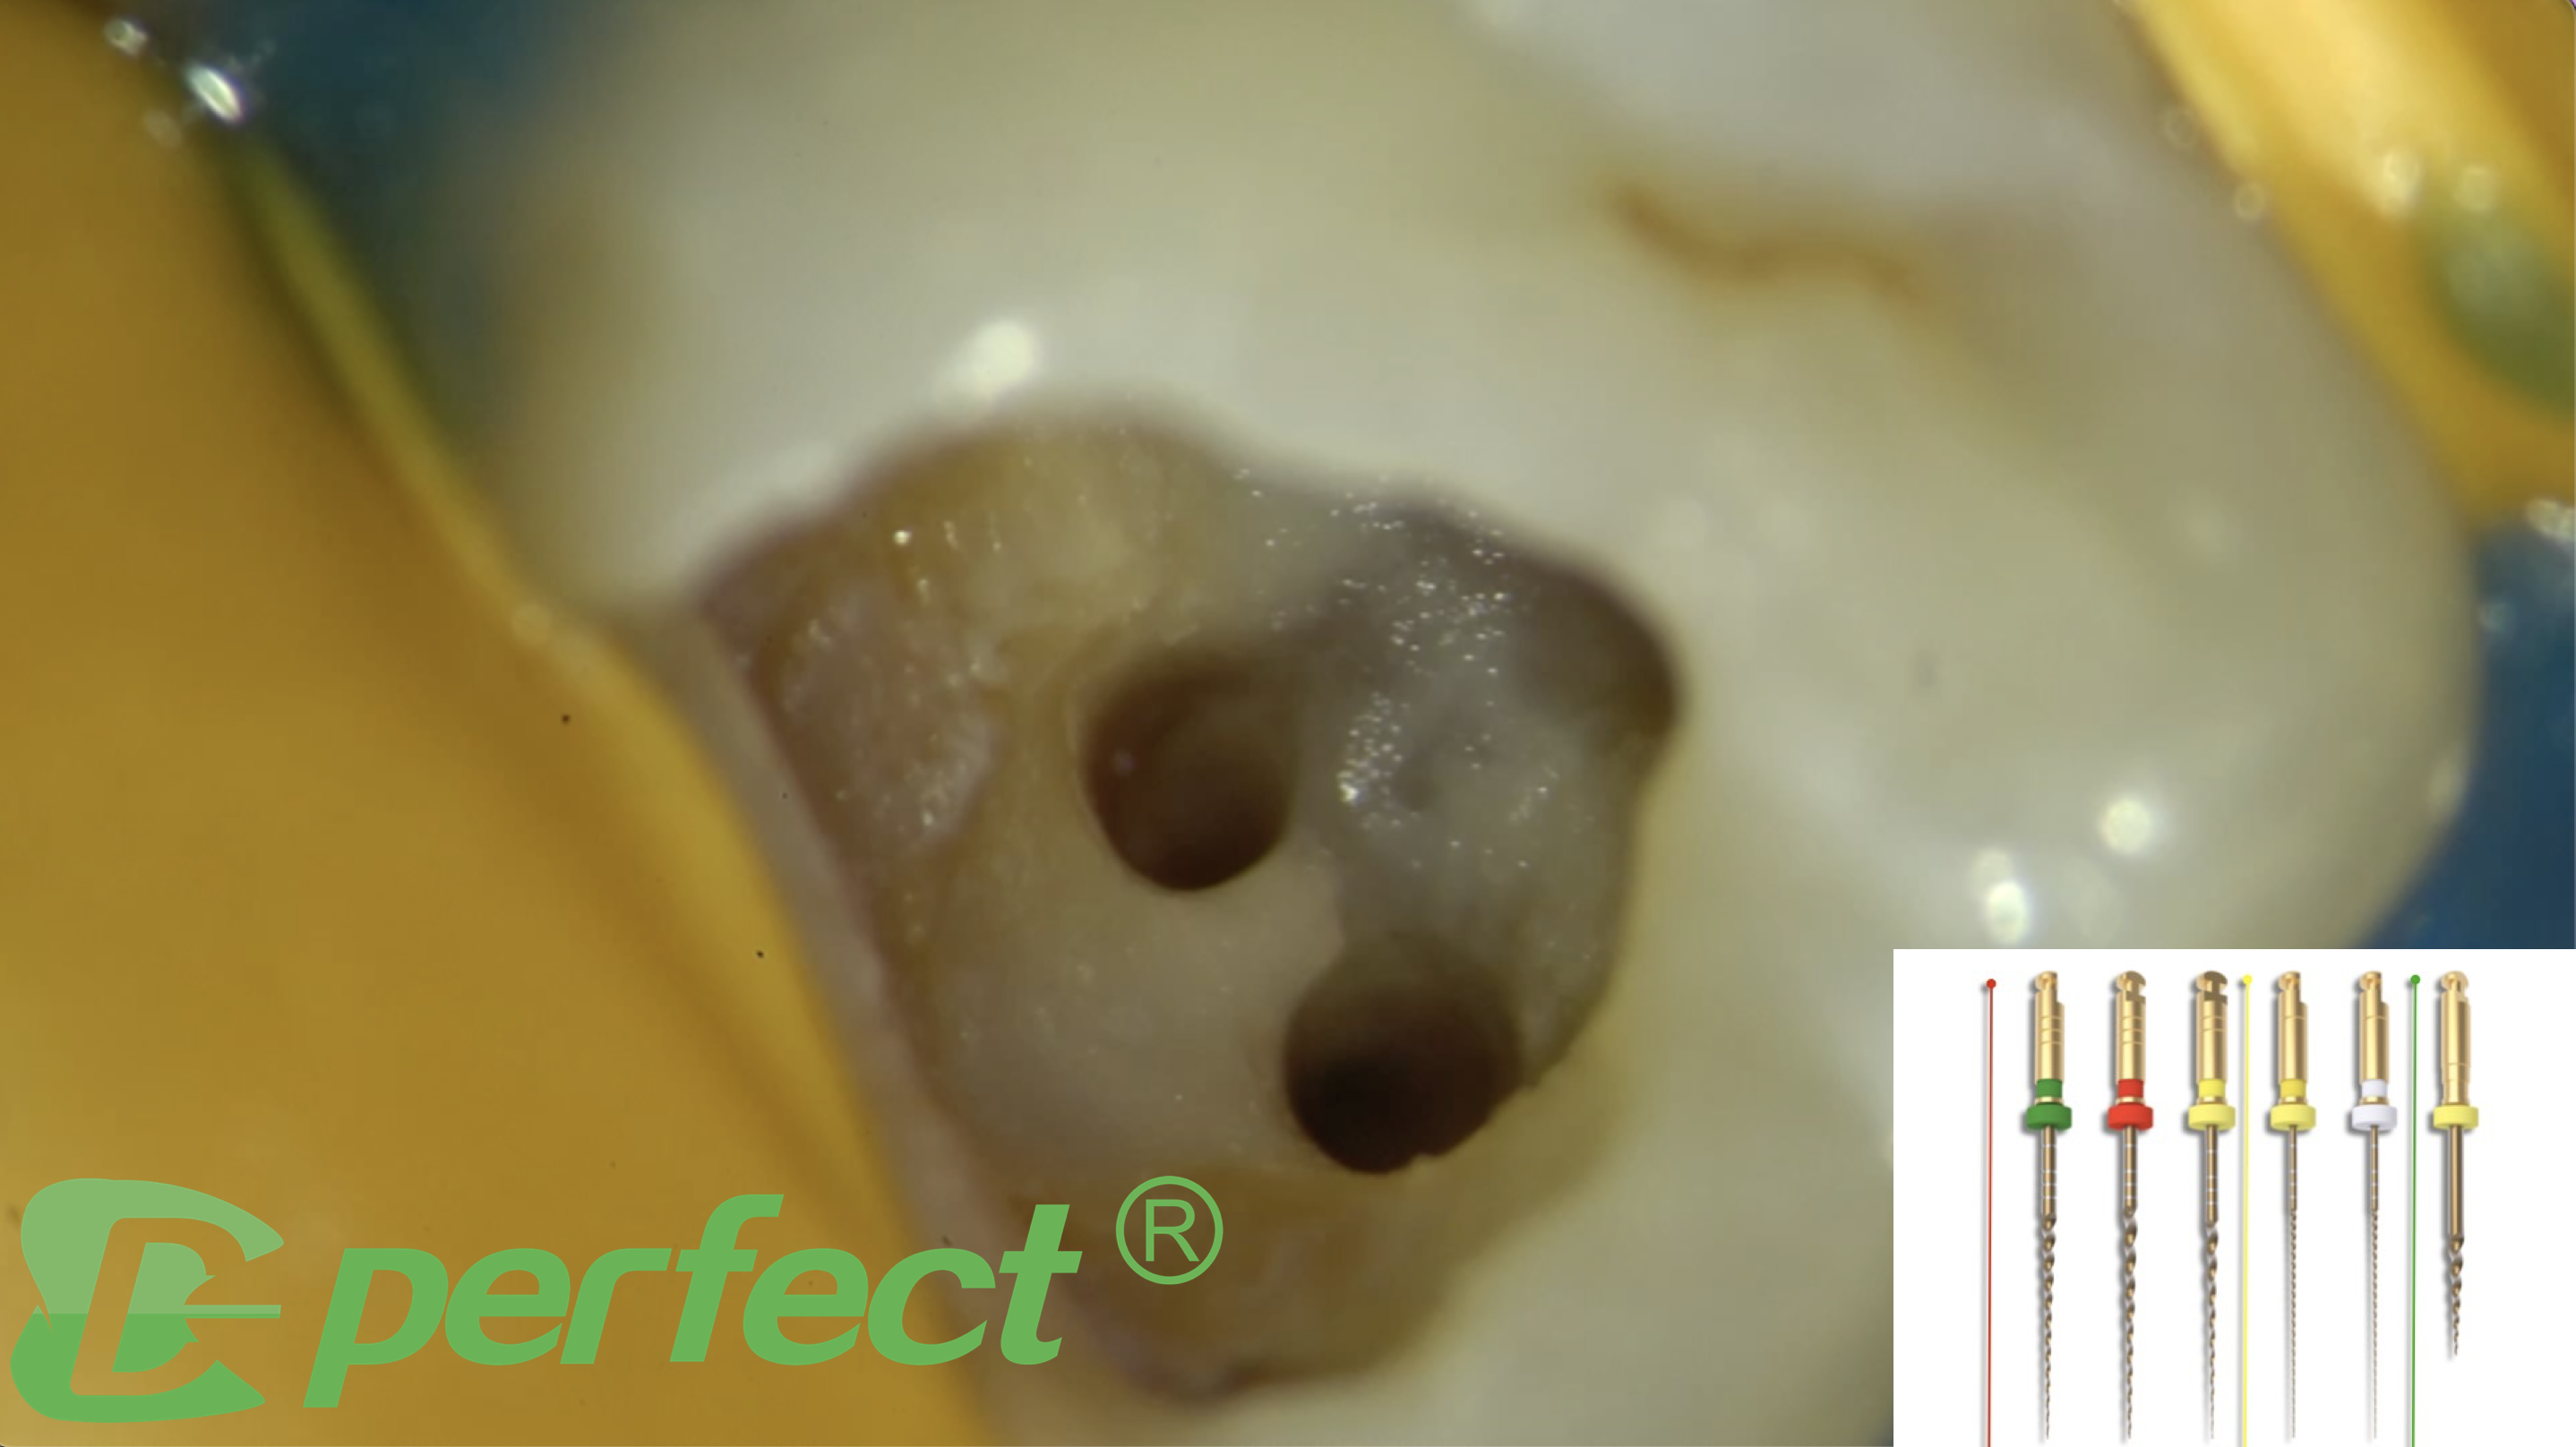 Endodontic management of a maxillary molar  with confluencing canals using MG3 files